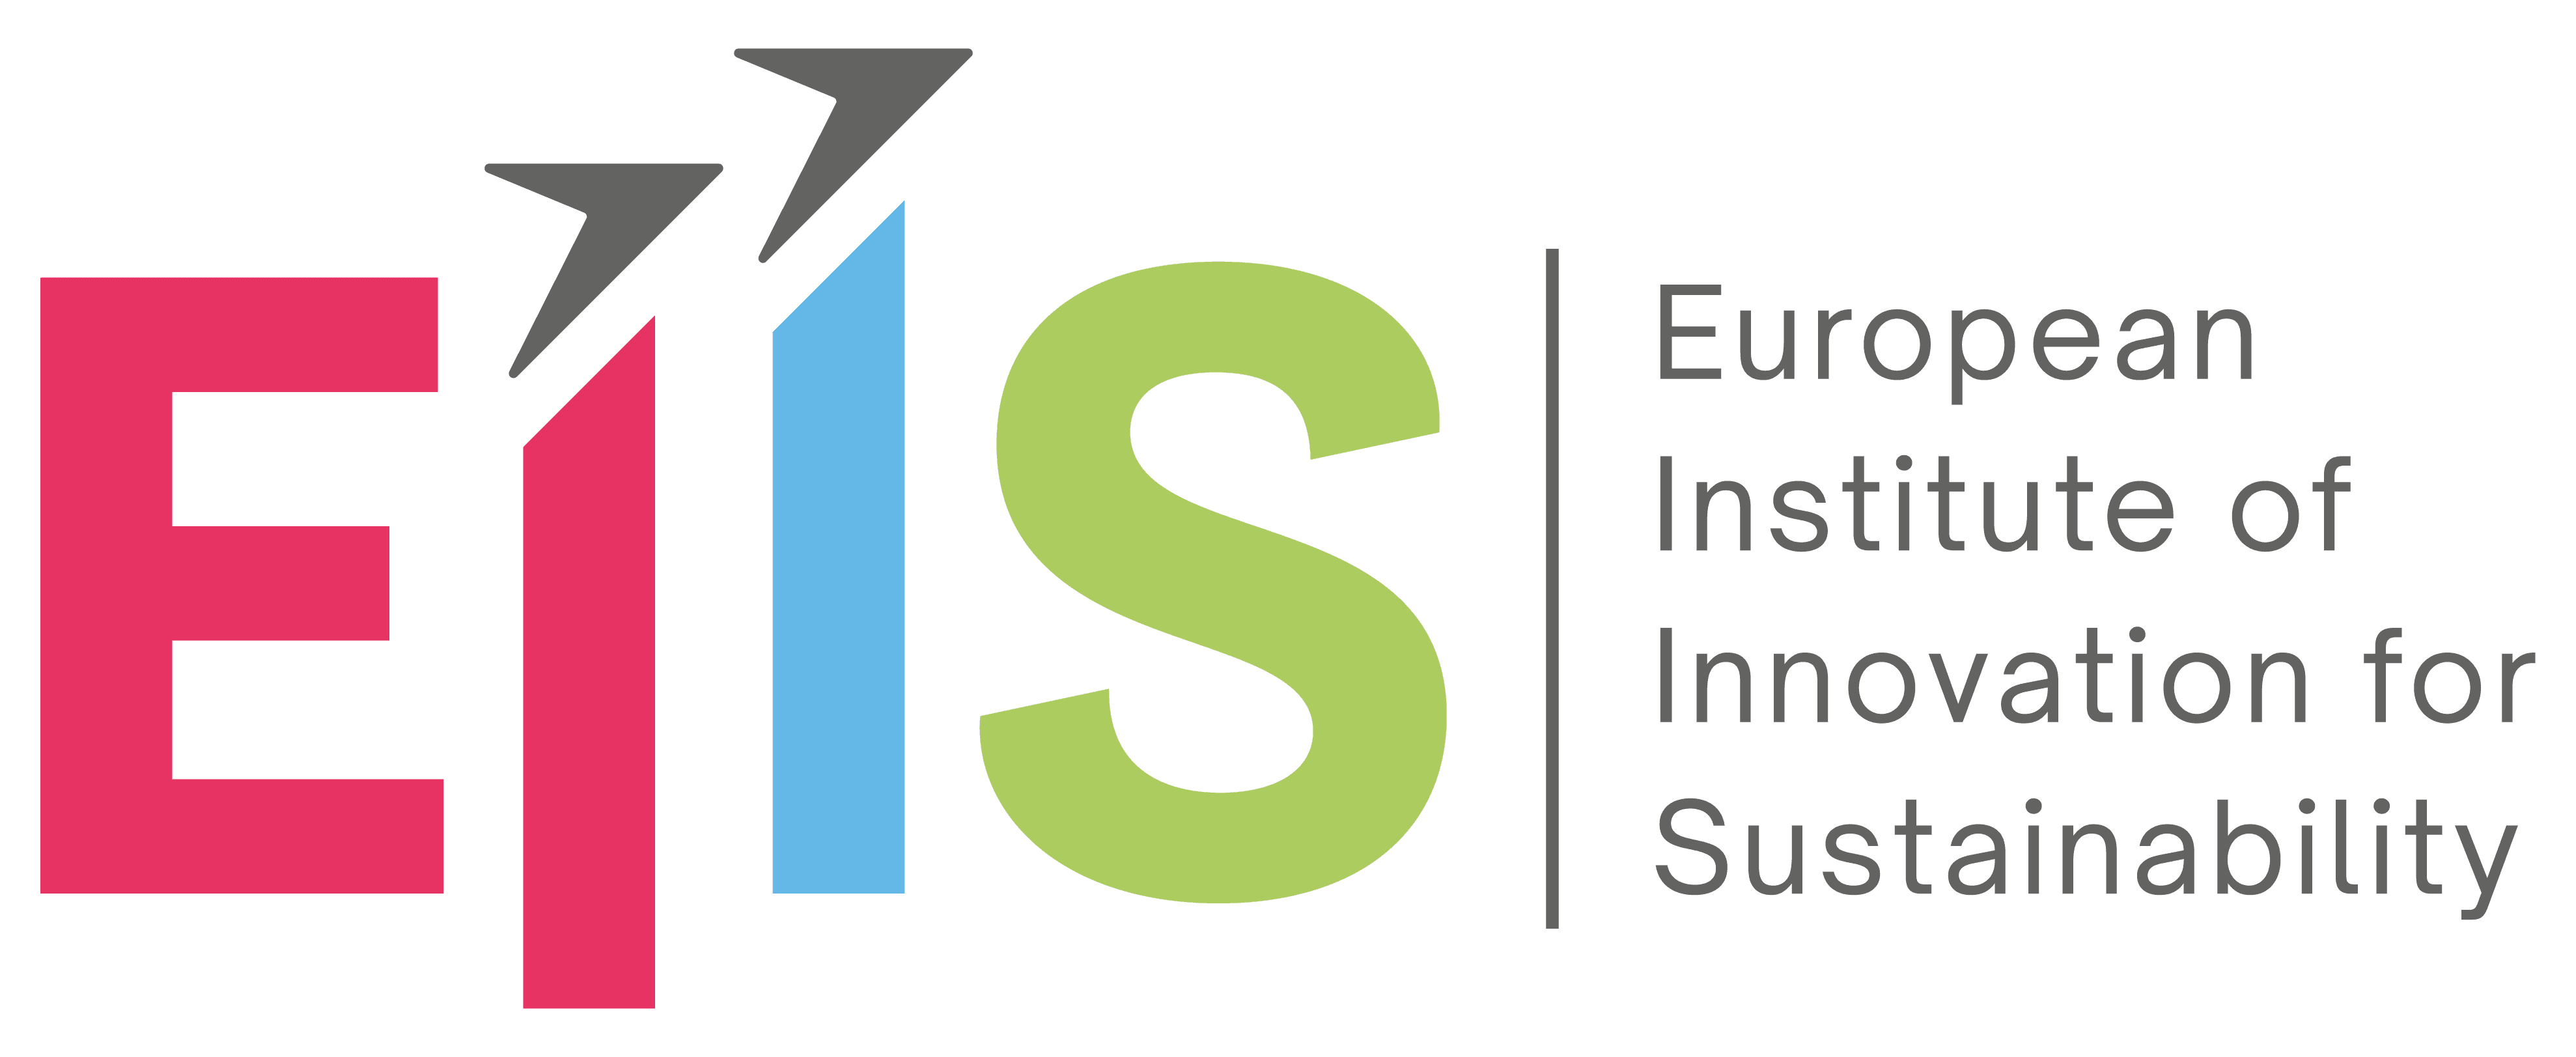 European Institute of Innovation for Sustainability